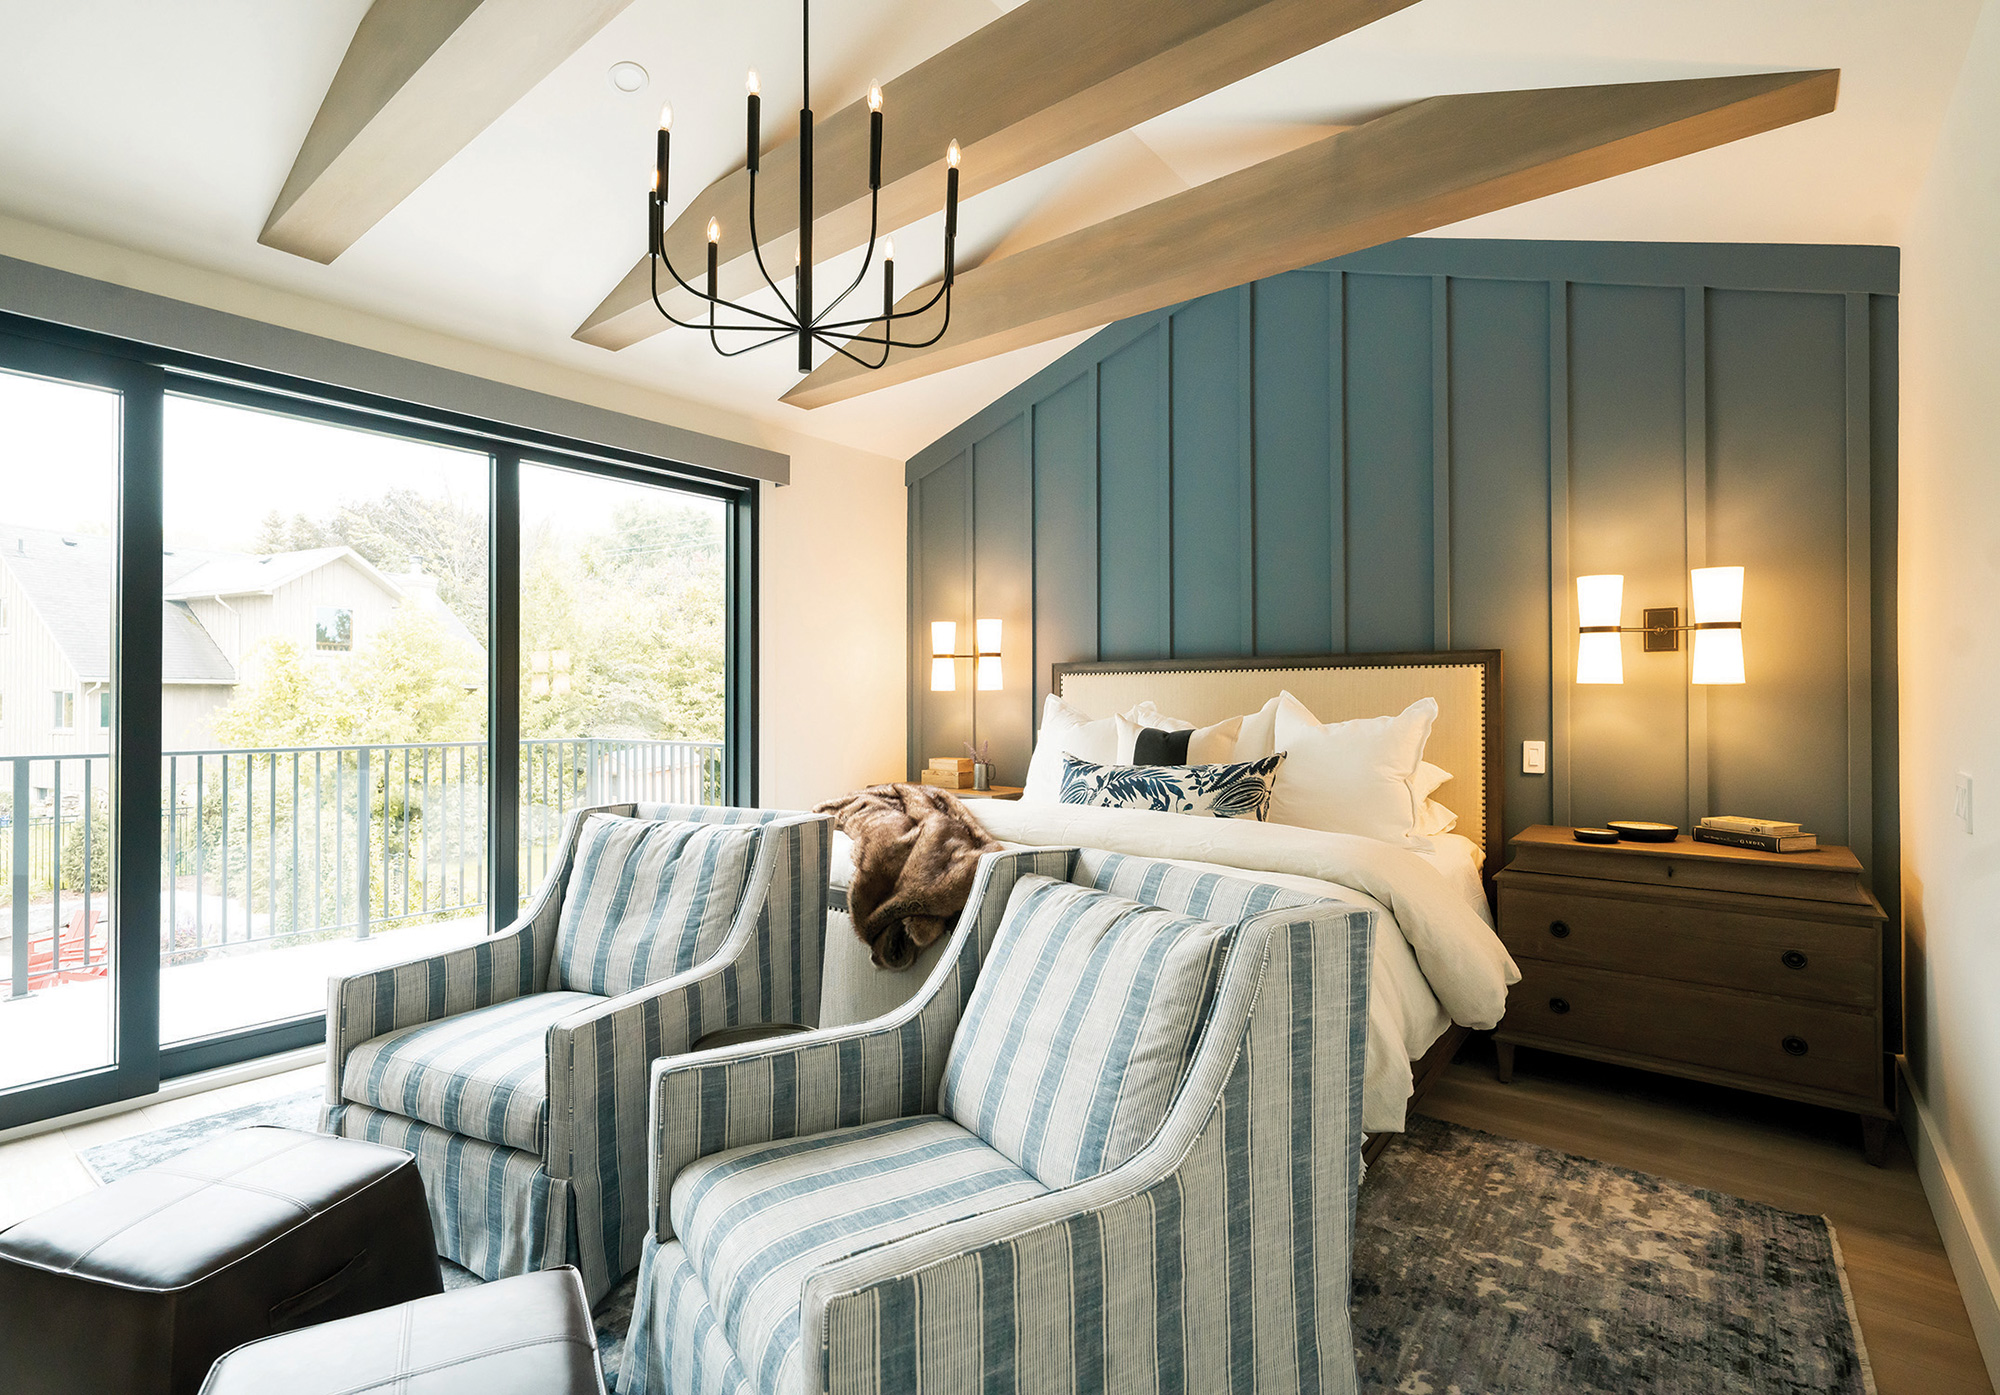 A deep blue feature wall and natural textures in the principal bedroom. Rustic chandeliers and heated floors throughout the home.